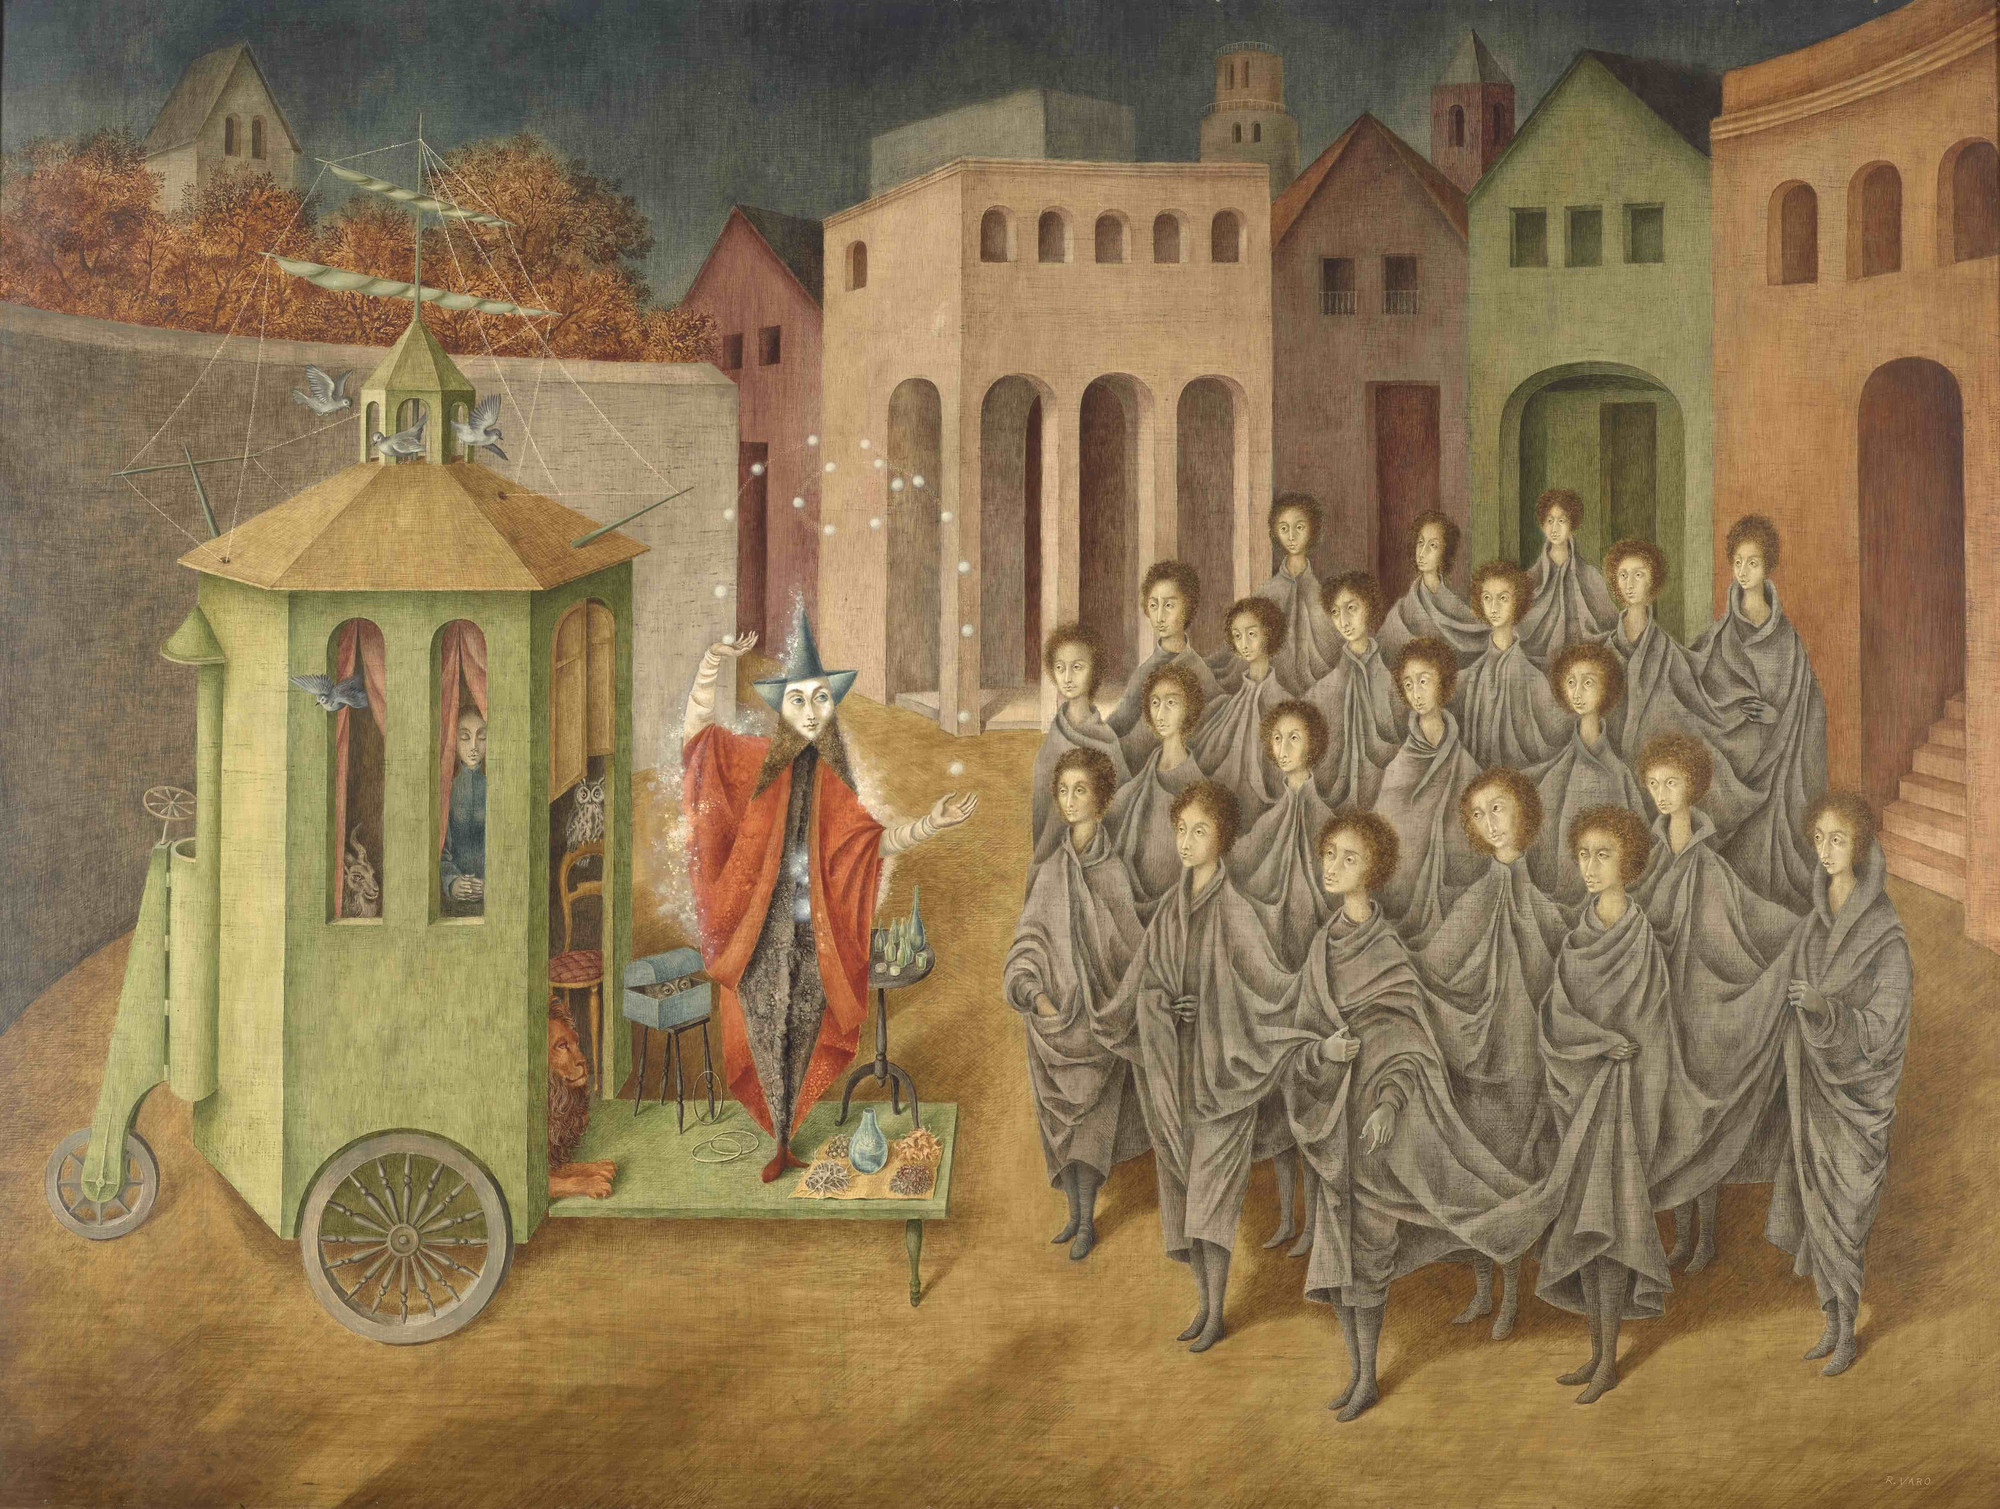 Remedios Varo. The Juggler (The Magician). 1956. Oil and inlaid mother of pearl on board, 35 13/16 × 48 1/16” (91 × 122 cm). Gift of Joan H. Tisch (by exchange)